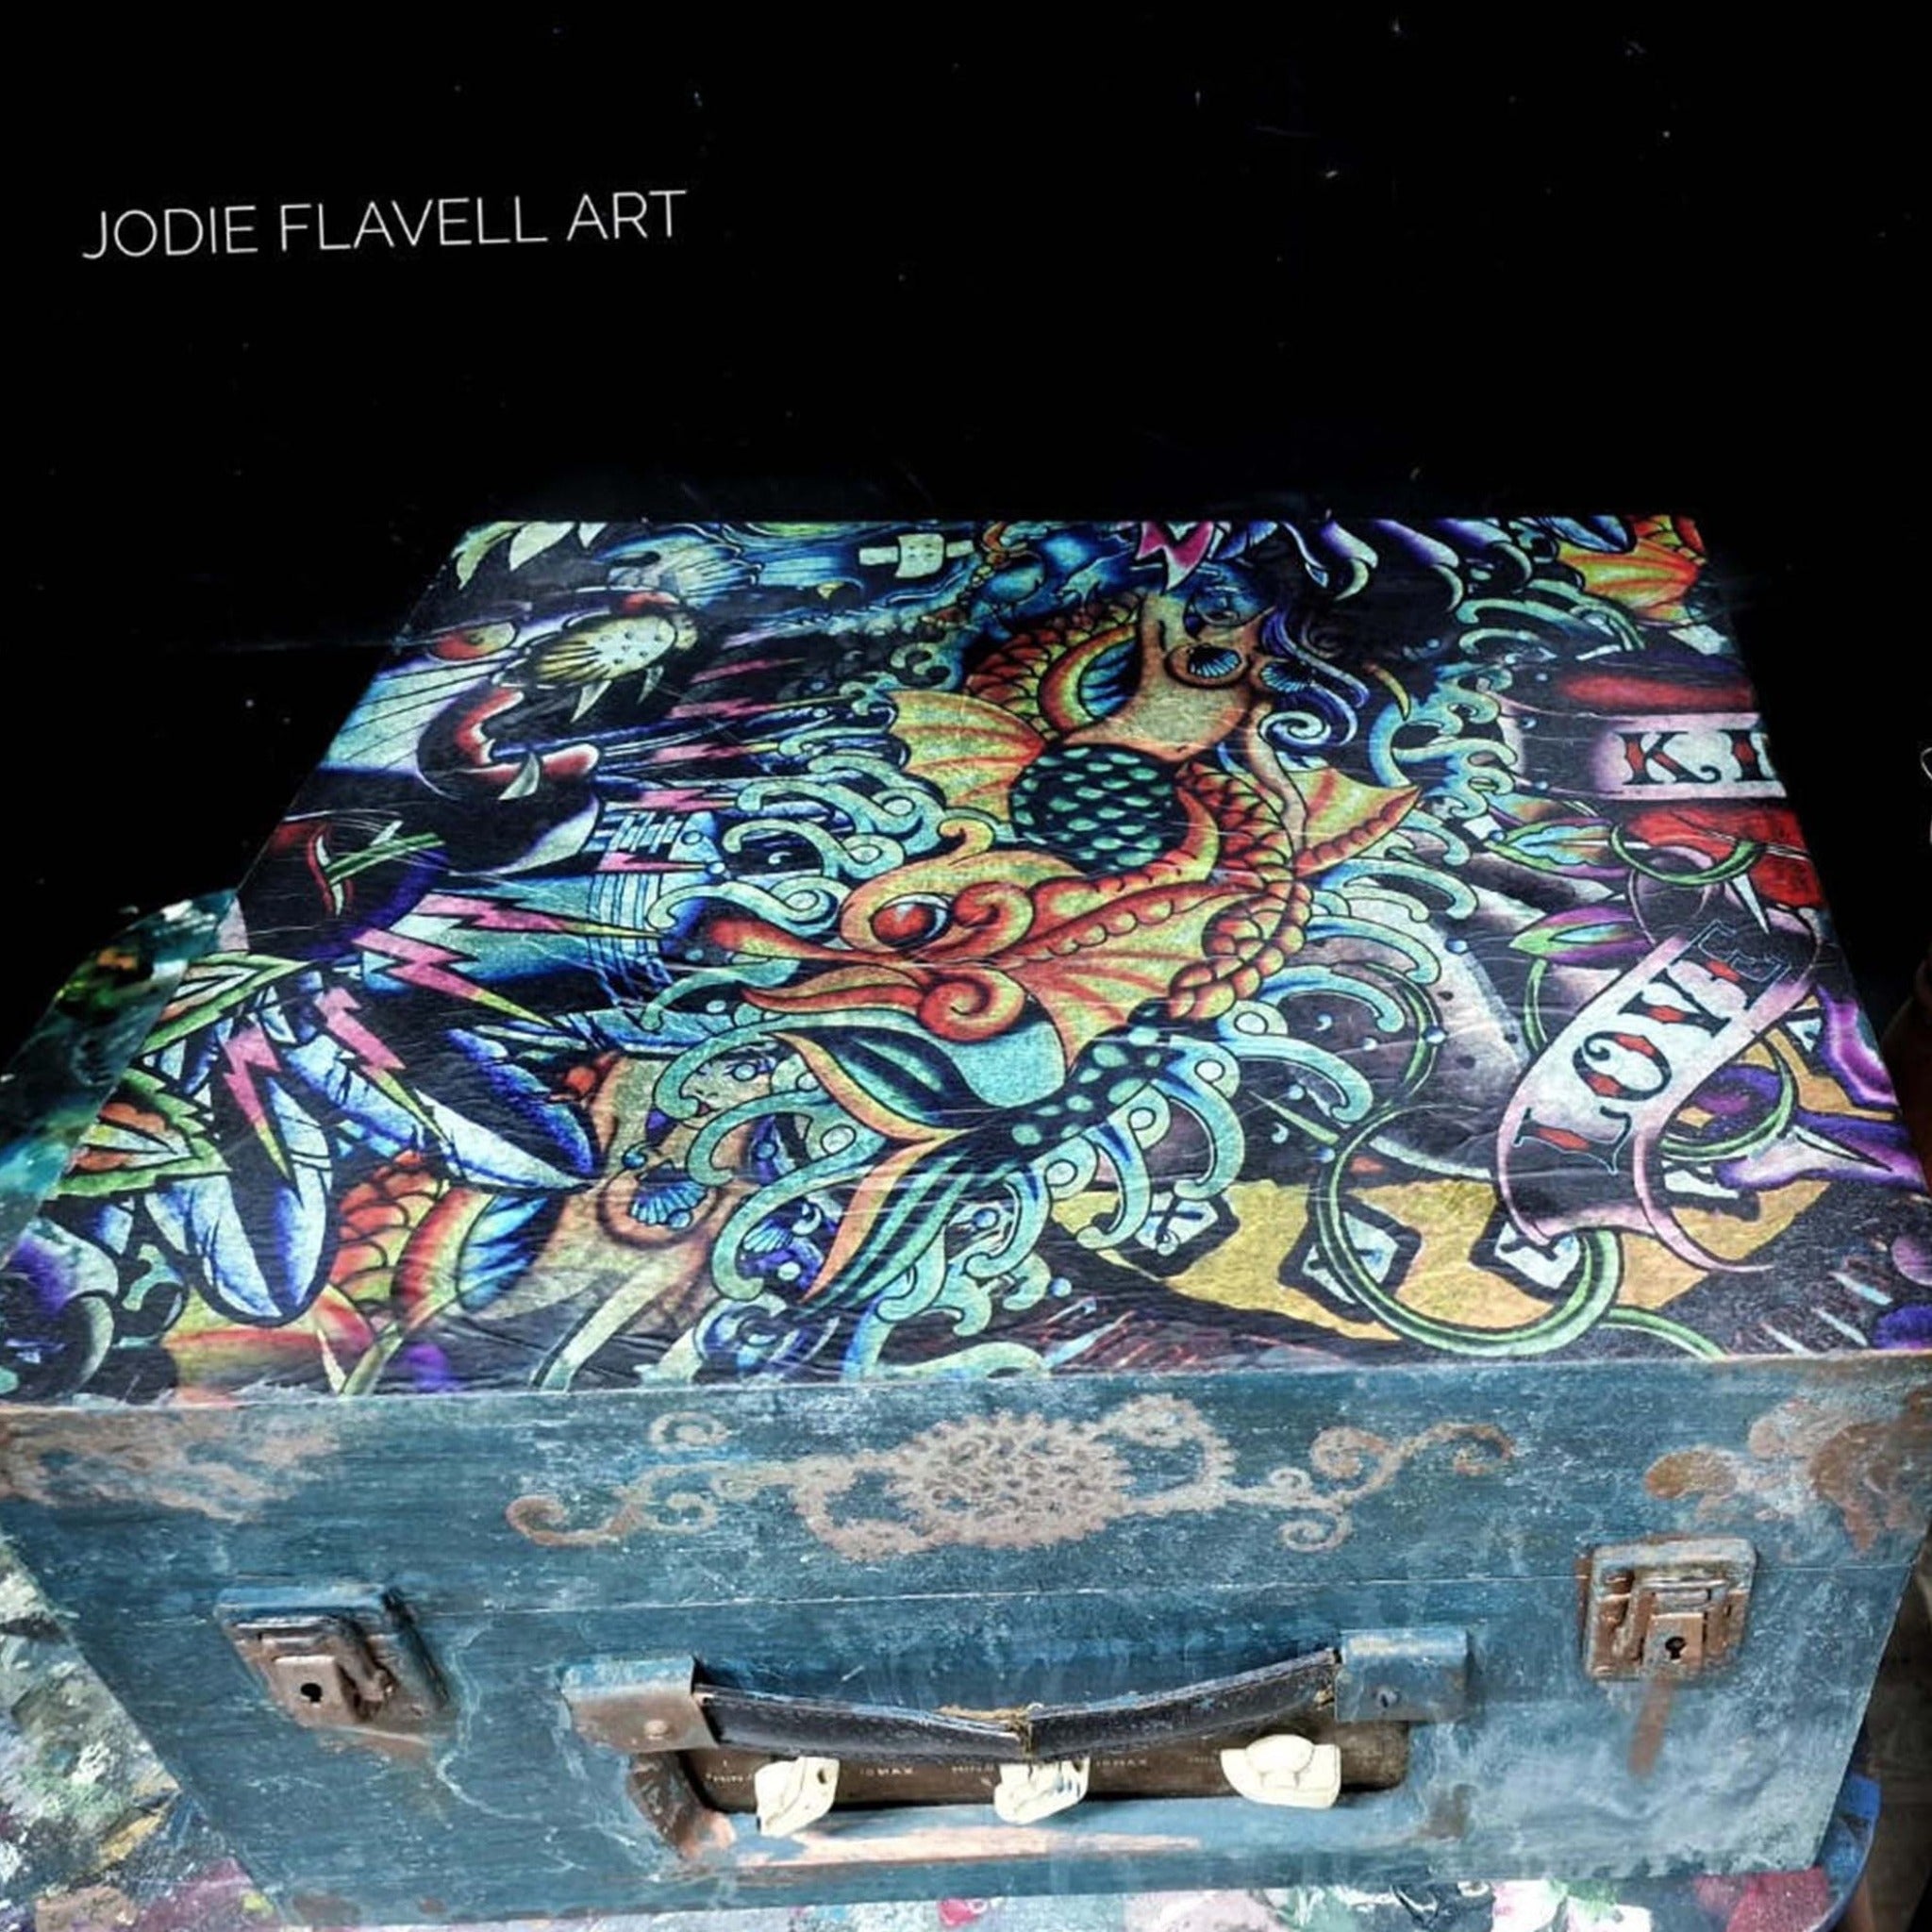 A vintage luggage box refurbished by Jodie Flavell Art is painted a distressed blue and features Belles & Whistles Vintage Tattoo A1 rice paper on it.